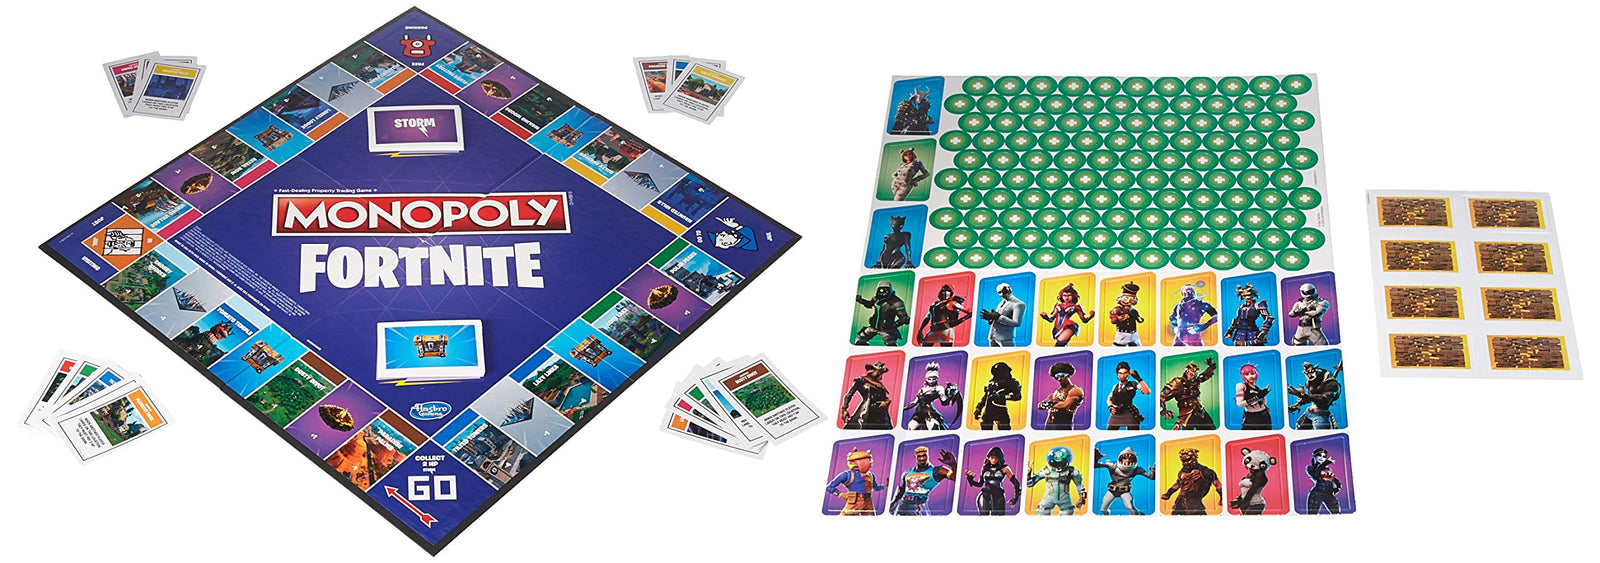 Monopoly: Fortnite Edition Board Game Inspired by Fortnite Video Game Ages 13 & Up